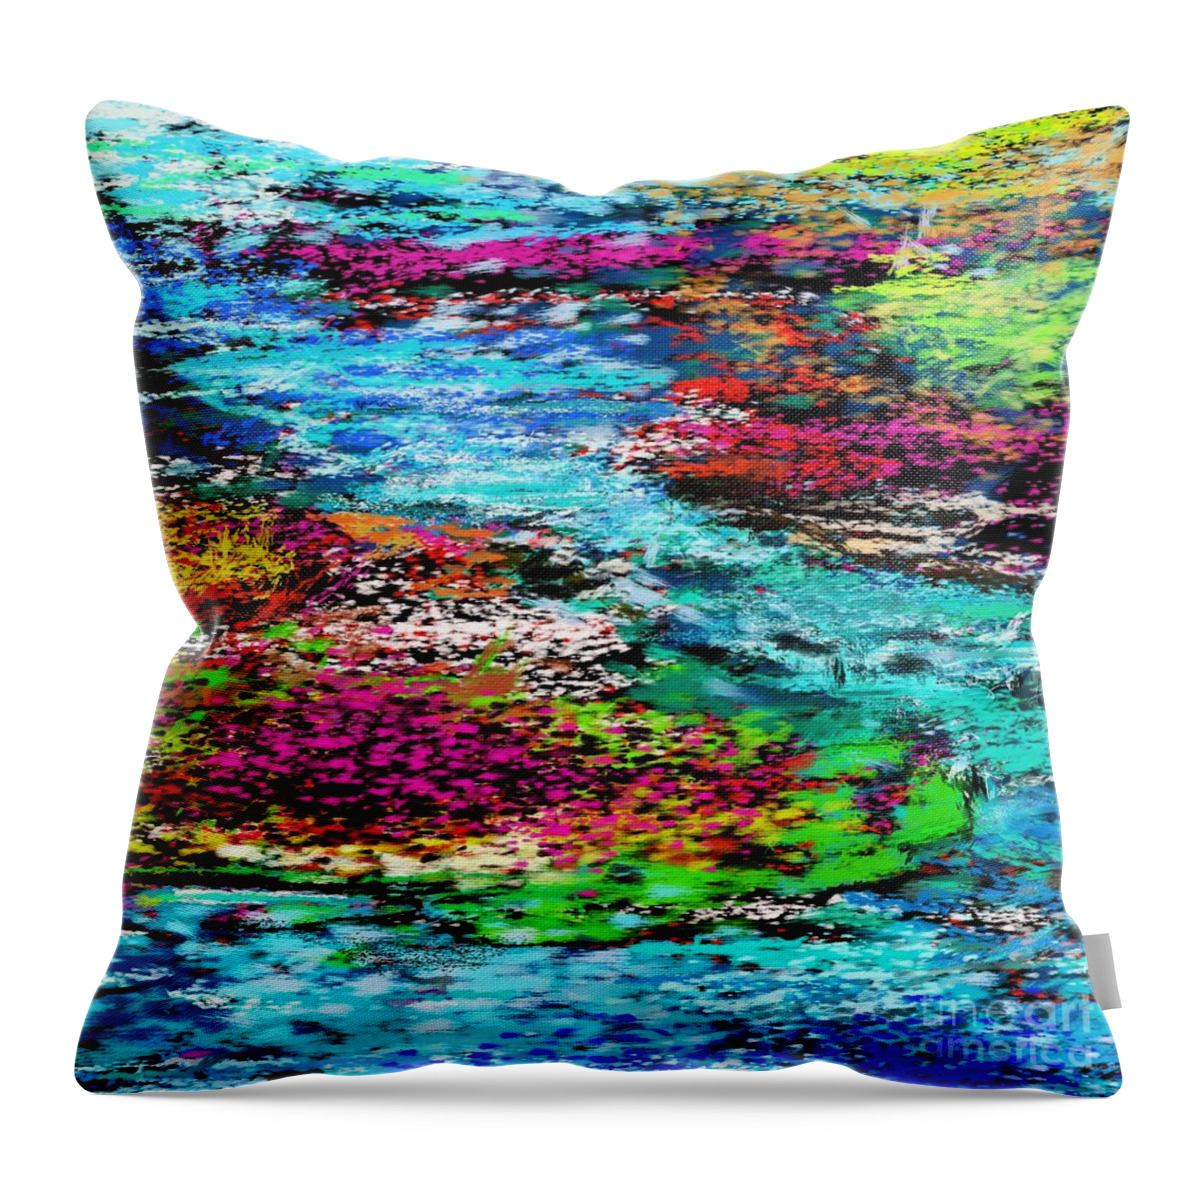 Abstract Throw Pillow featuring the digital art Thought Upon A Stream by David Lane